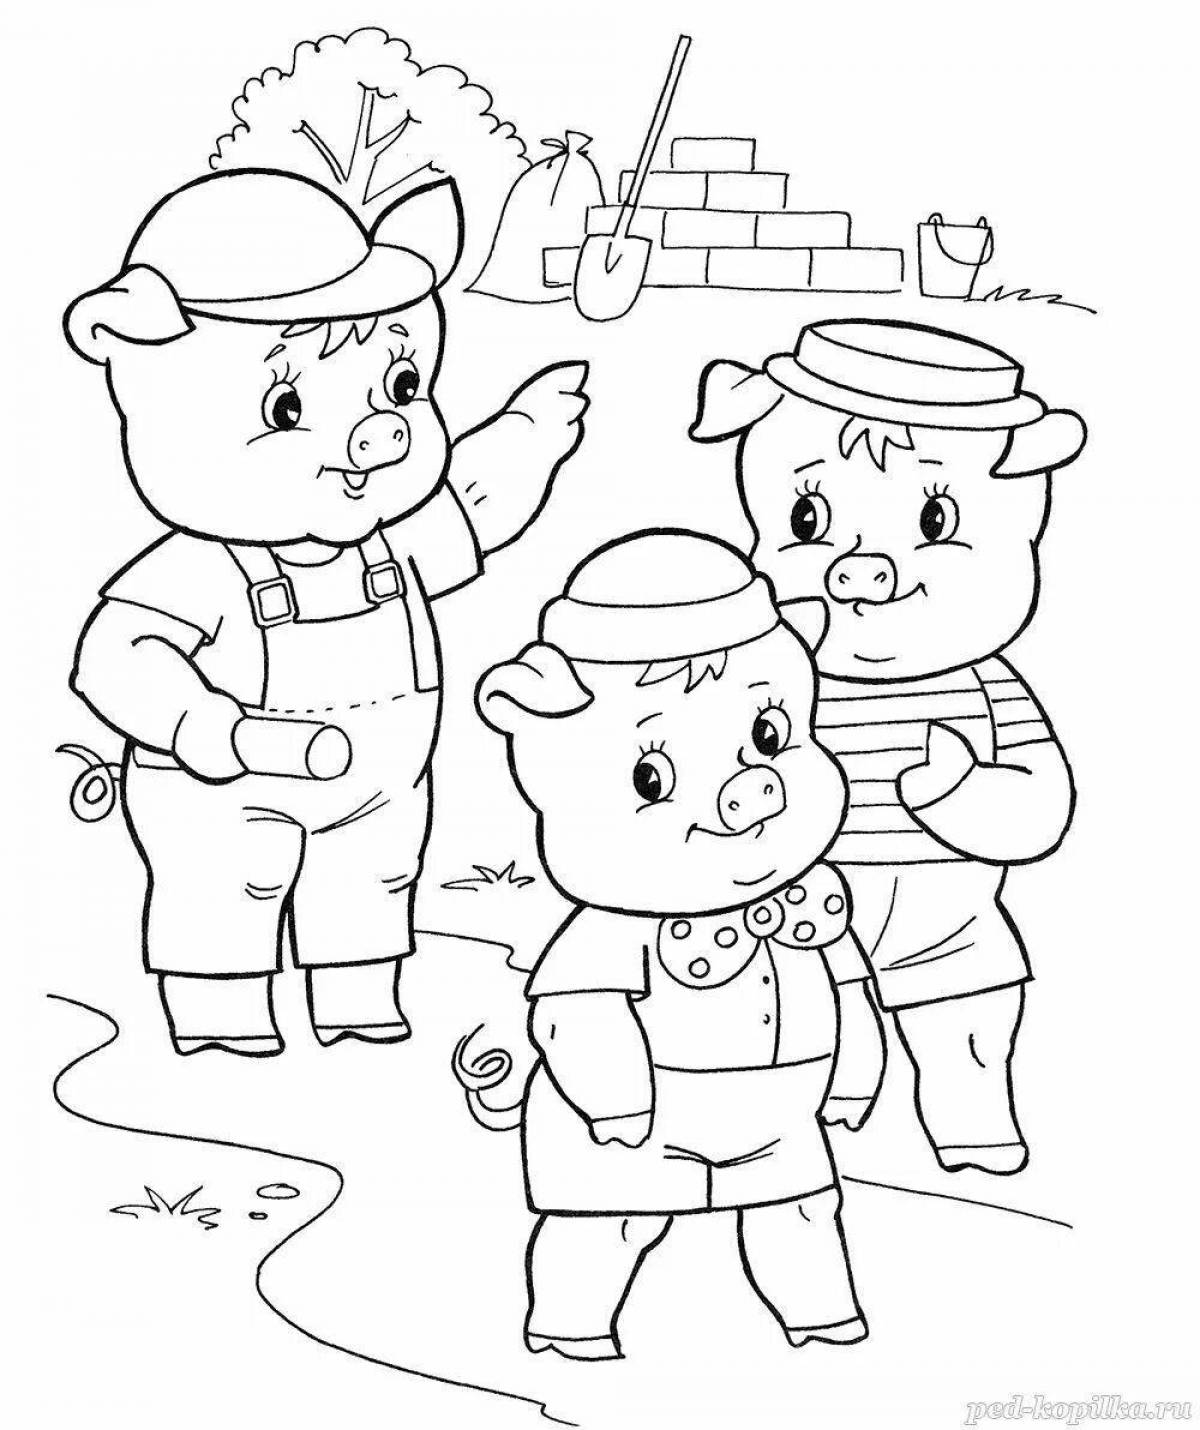 Coloring fairy tale three little pigs